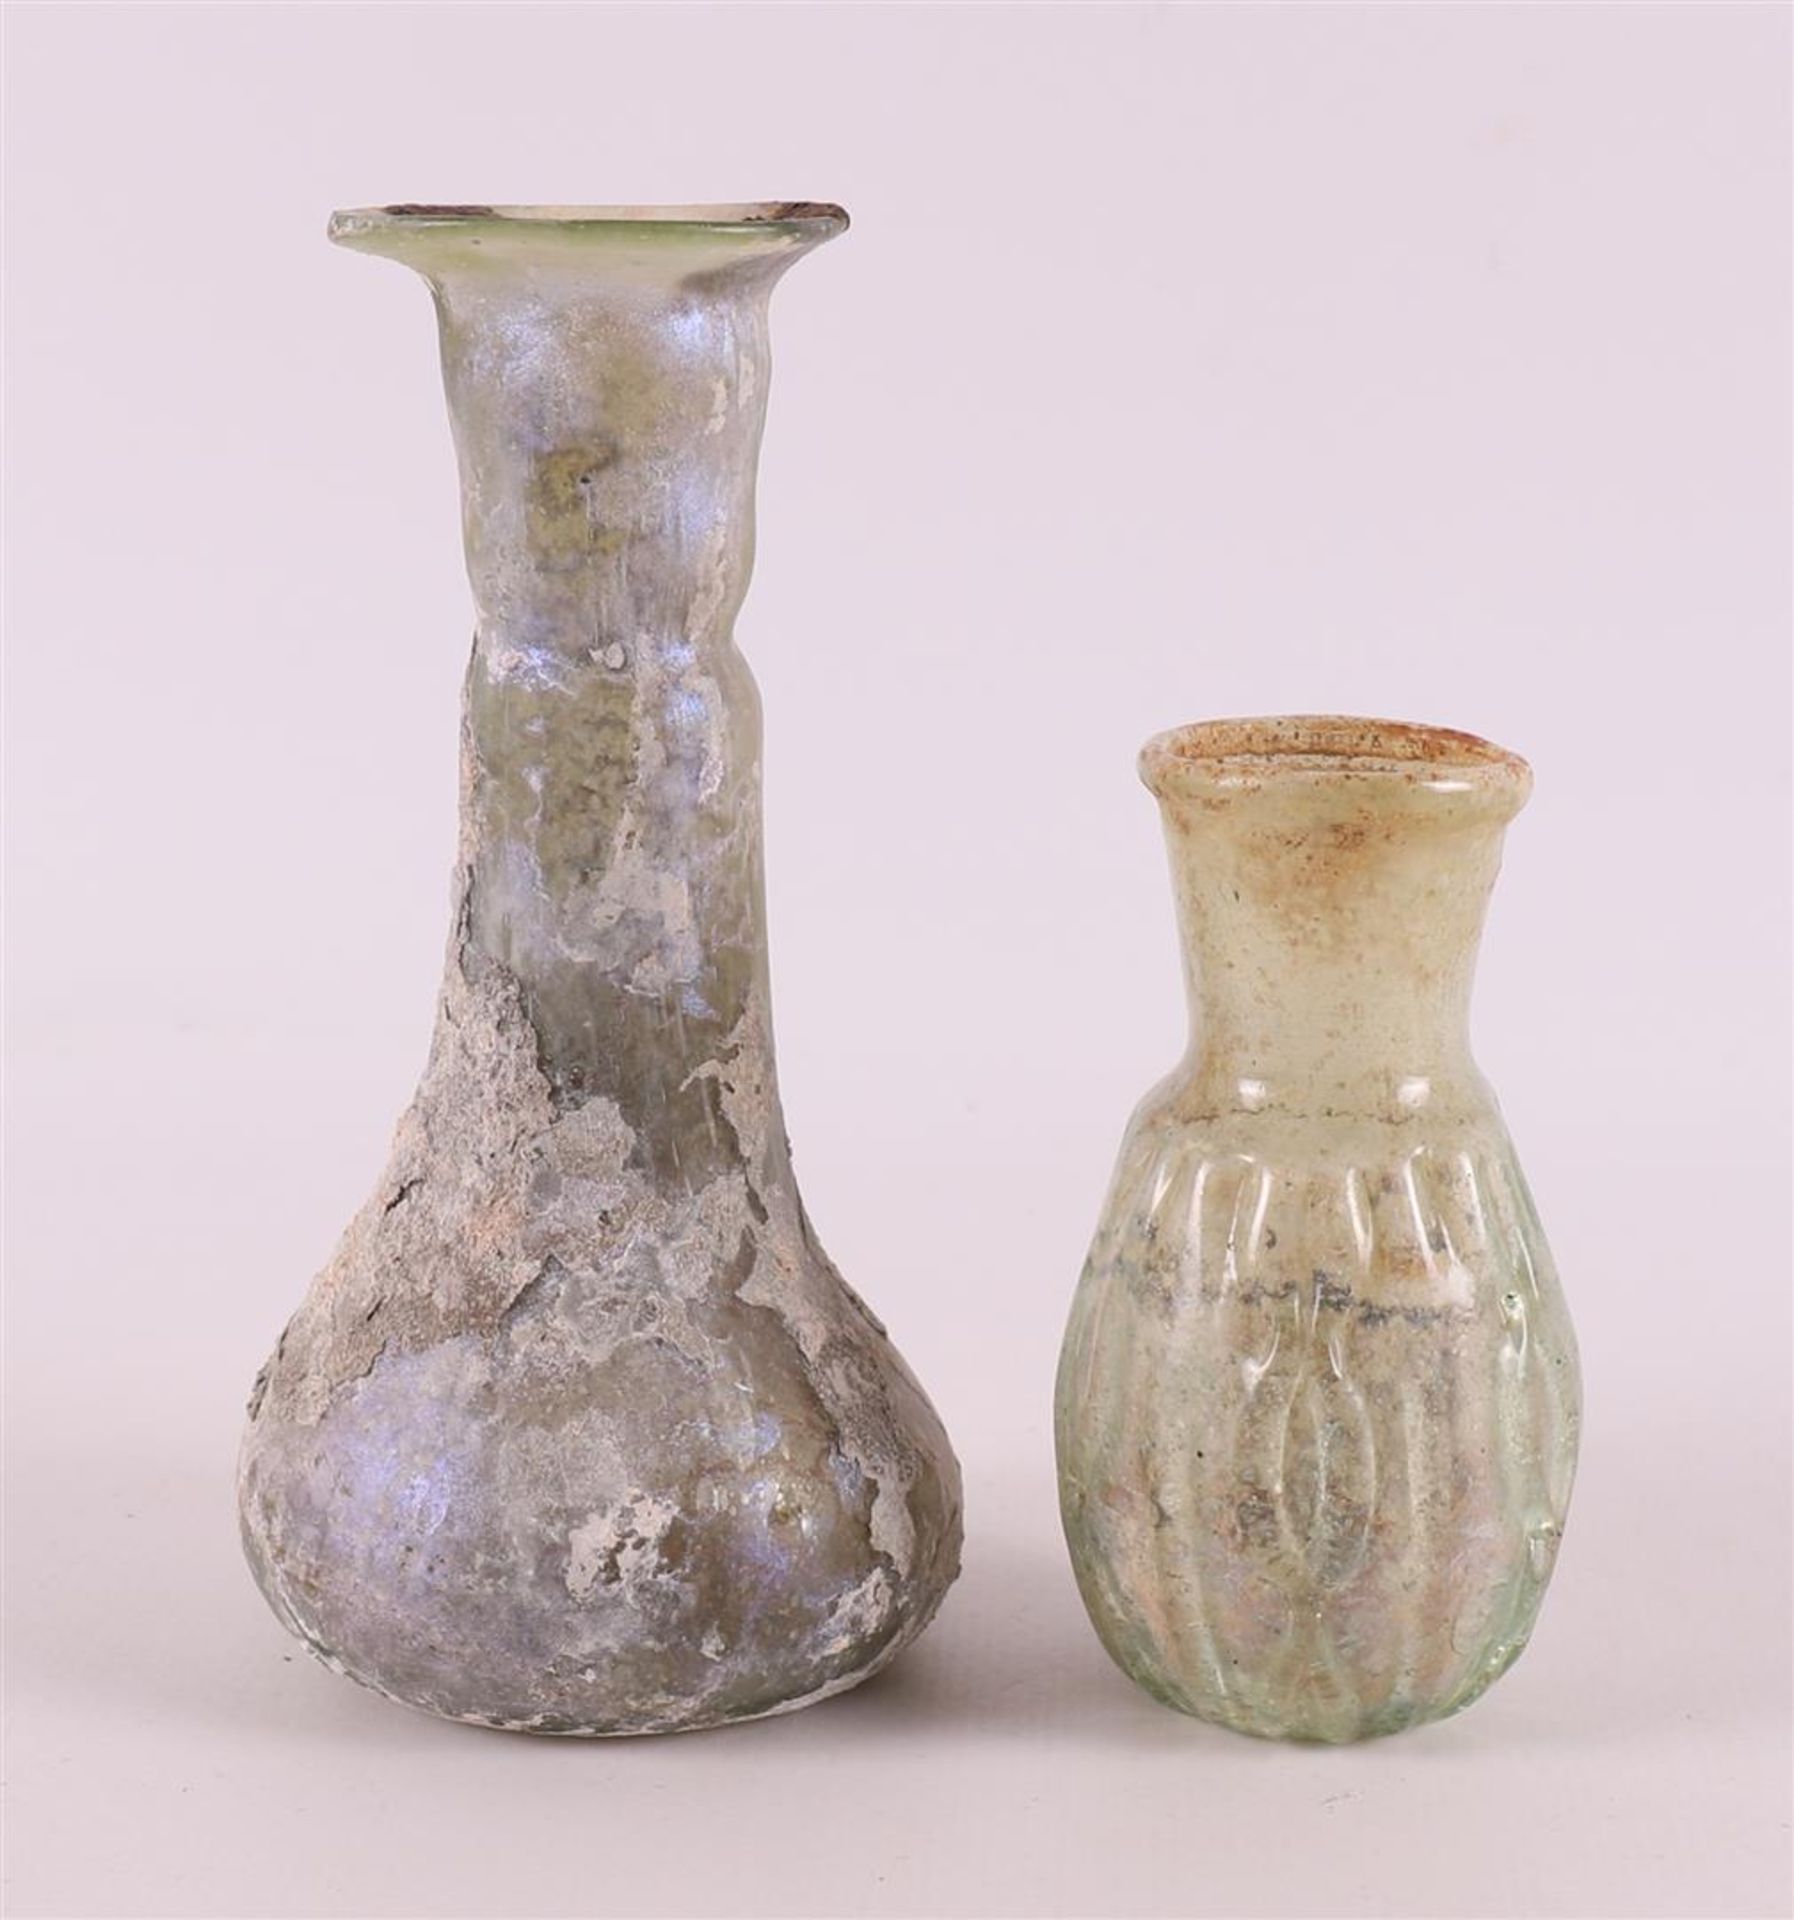 Two various Roman glass vases, 2nd - 4th century. - Image 2 of 6